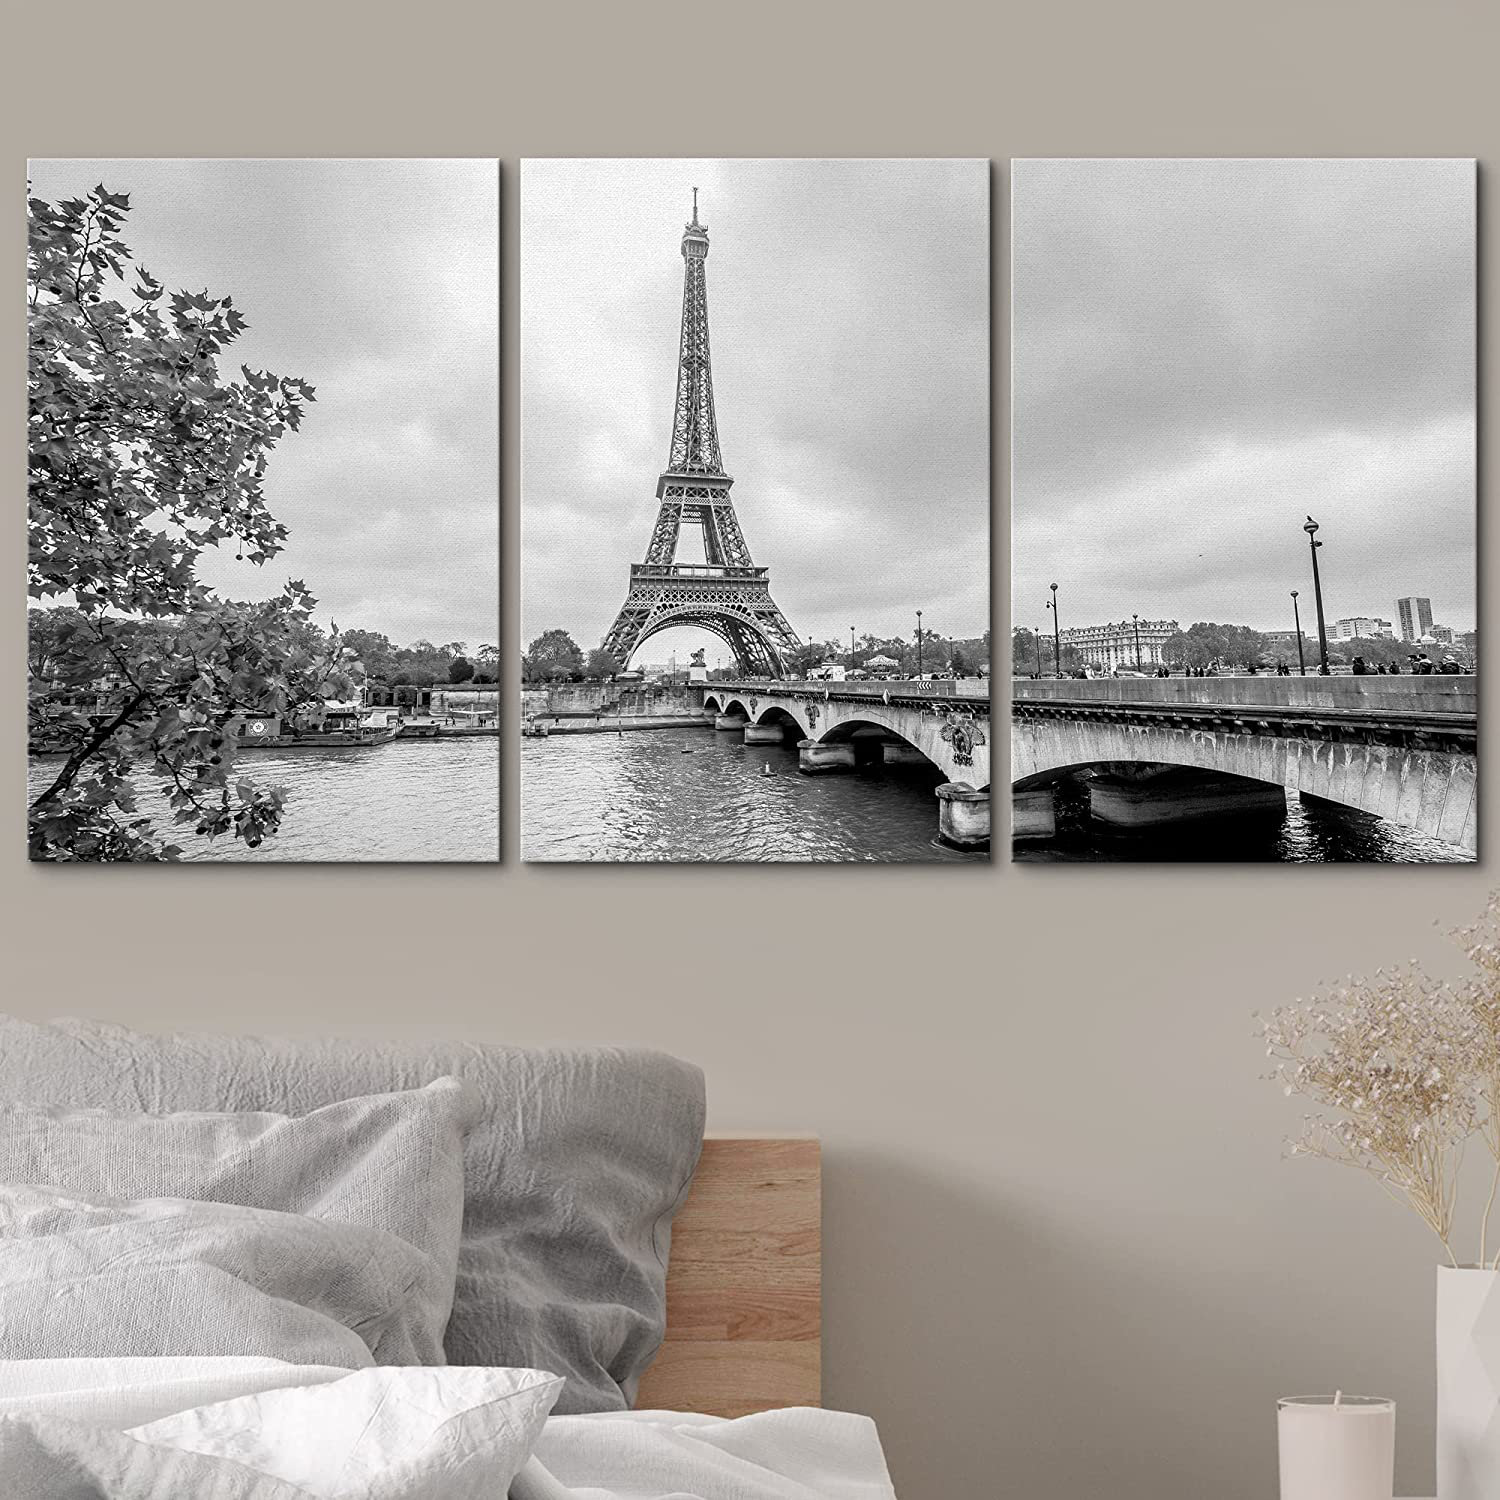 IDEA4WALL Paris | From Canvas Cityscape Wayfair Print And In Tower Eiffel White Seine. On Black 3 Pieces